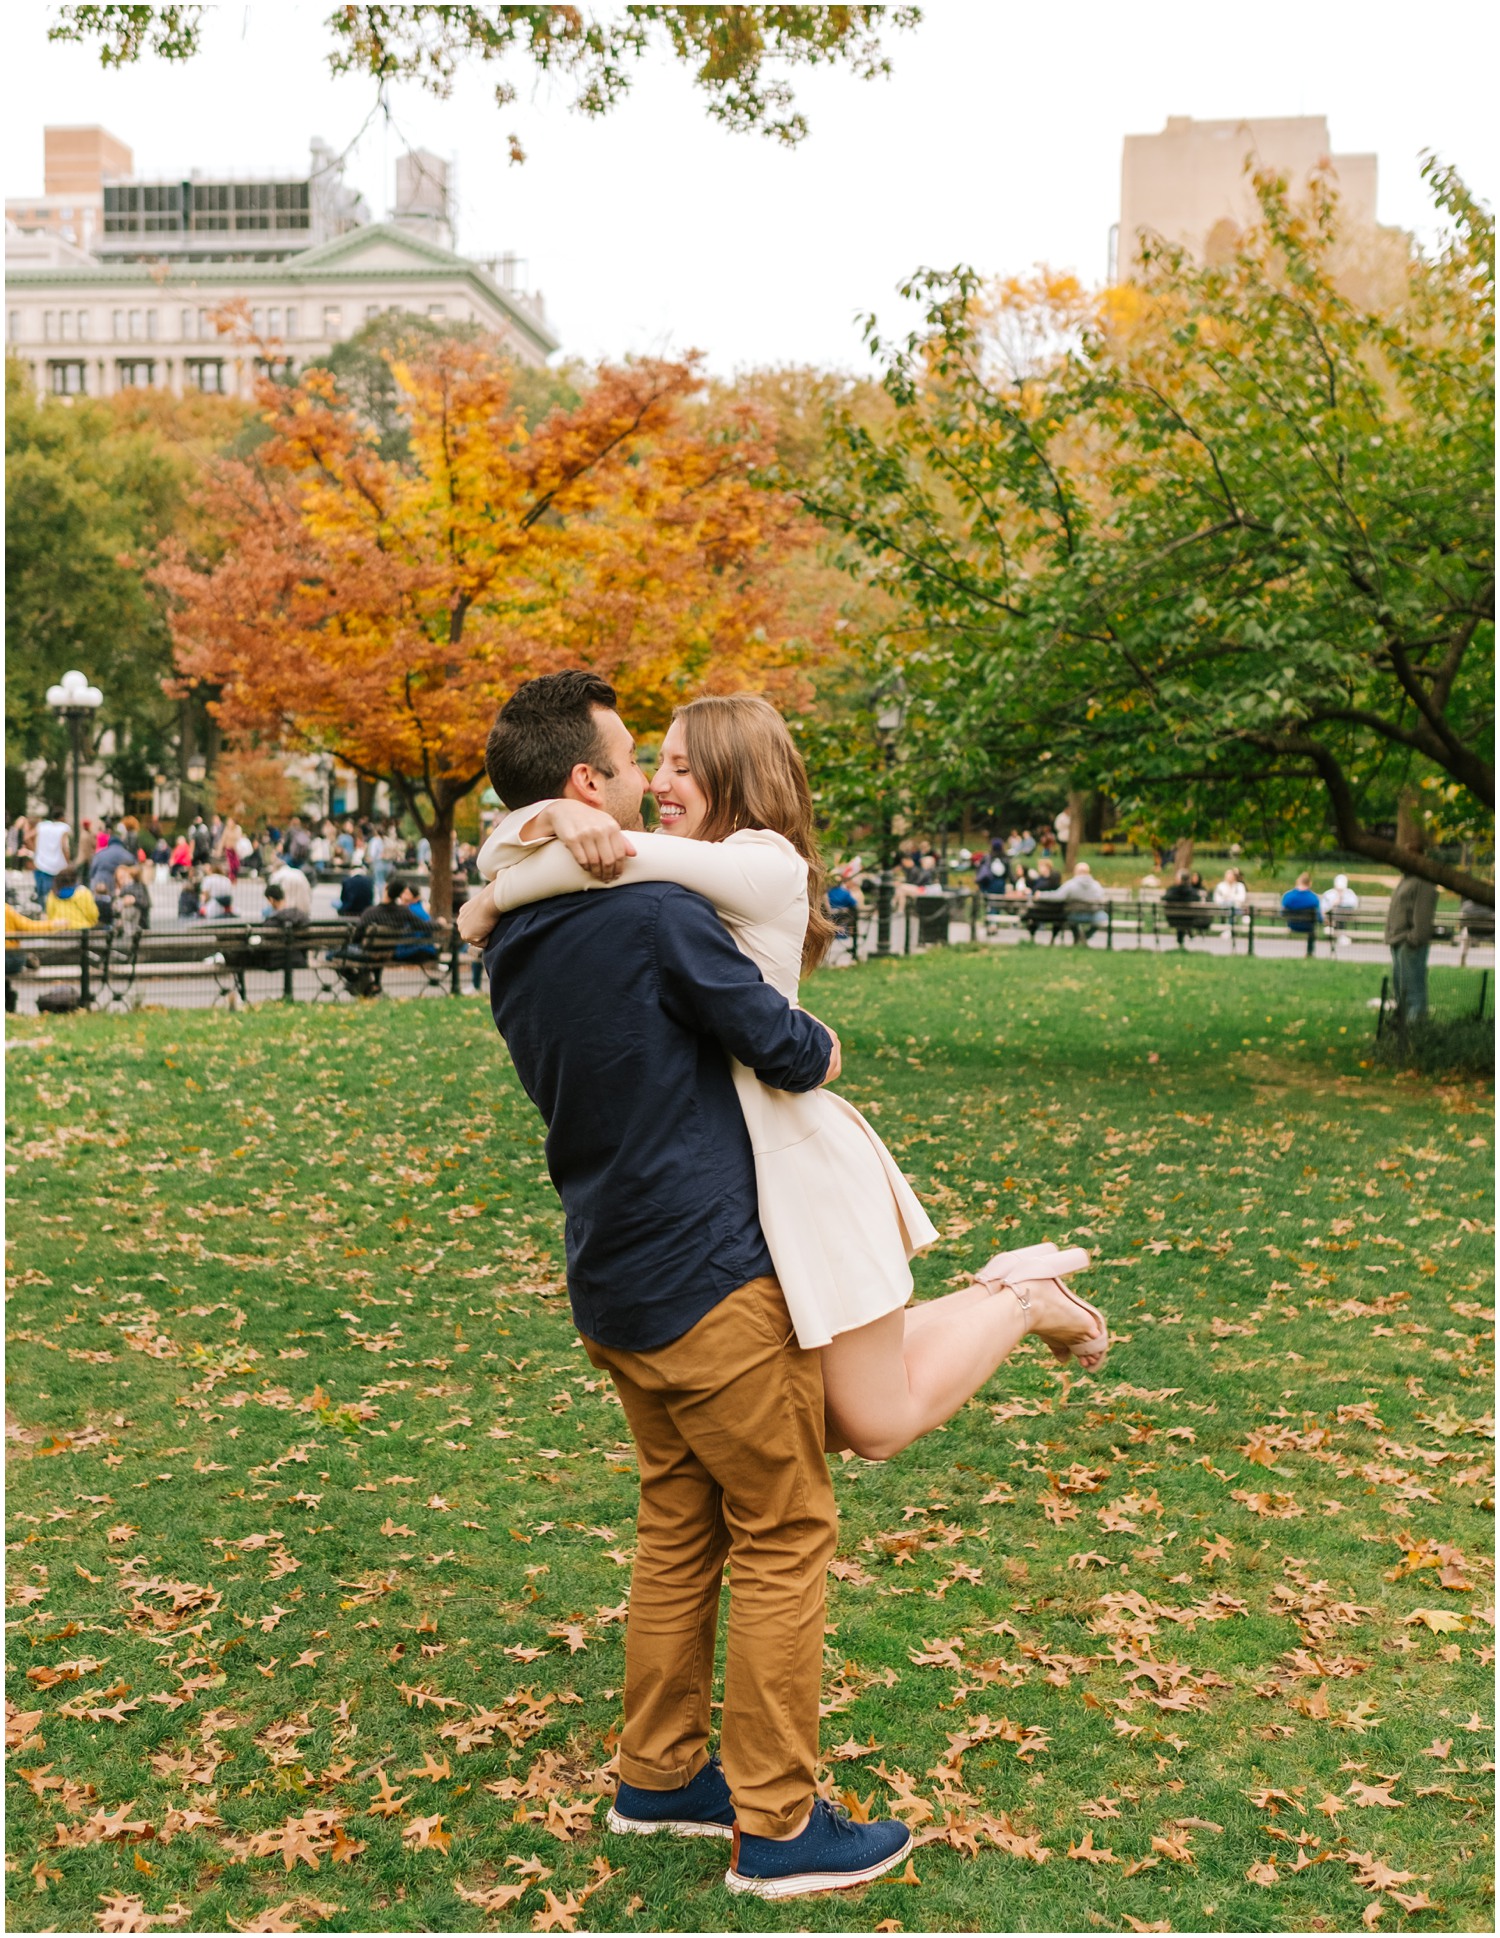 groom lifts bride in ivory dress up with fall trees in background